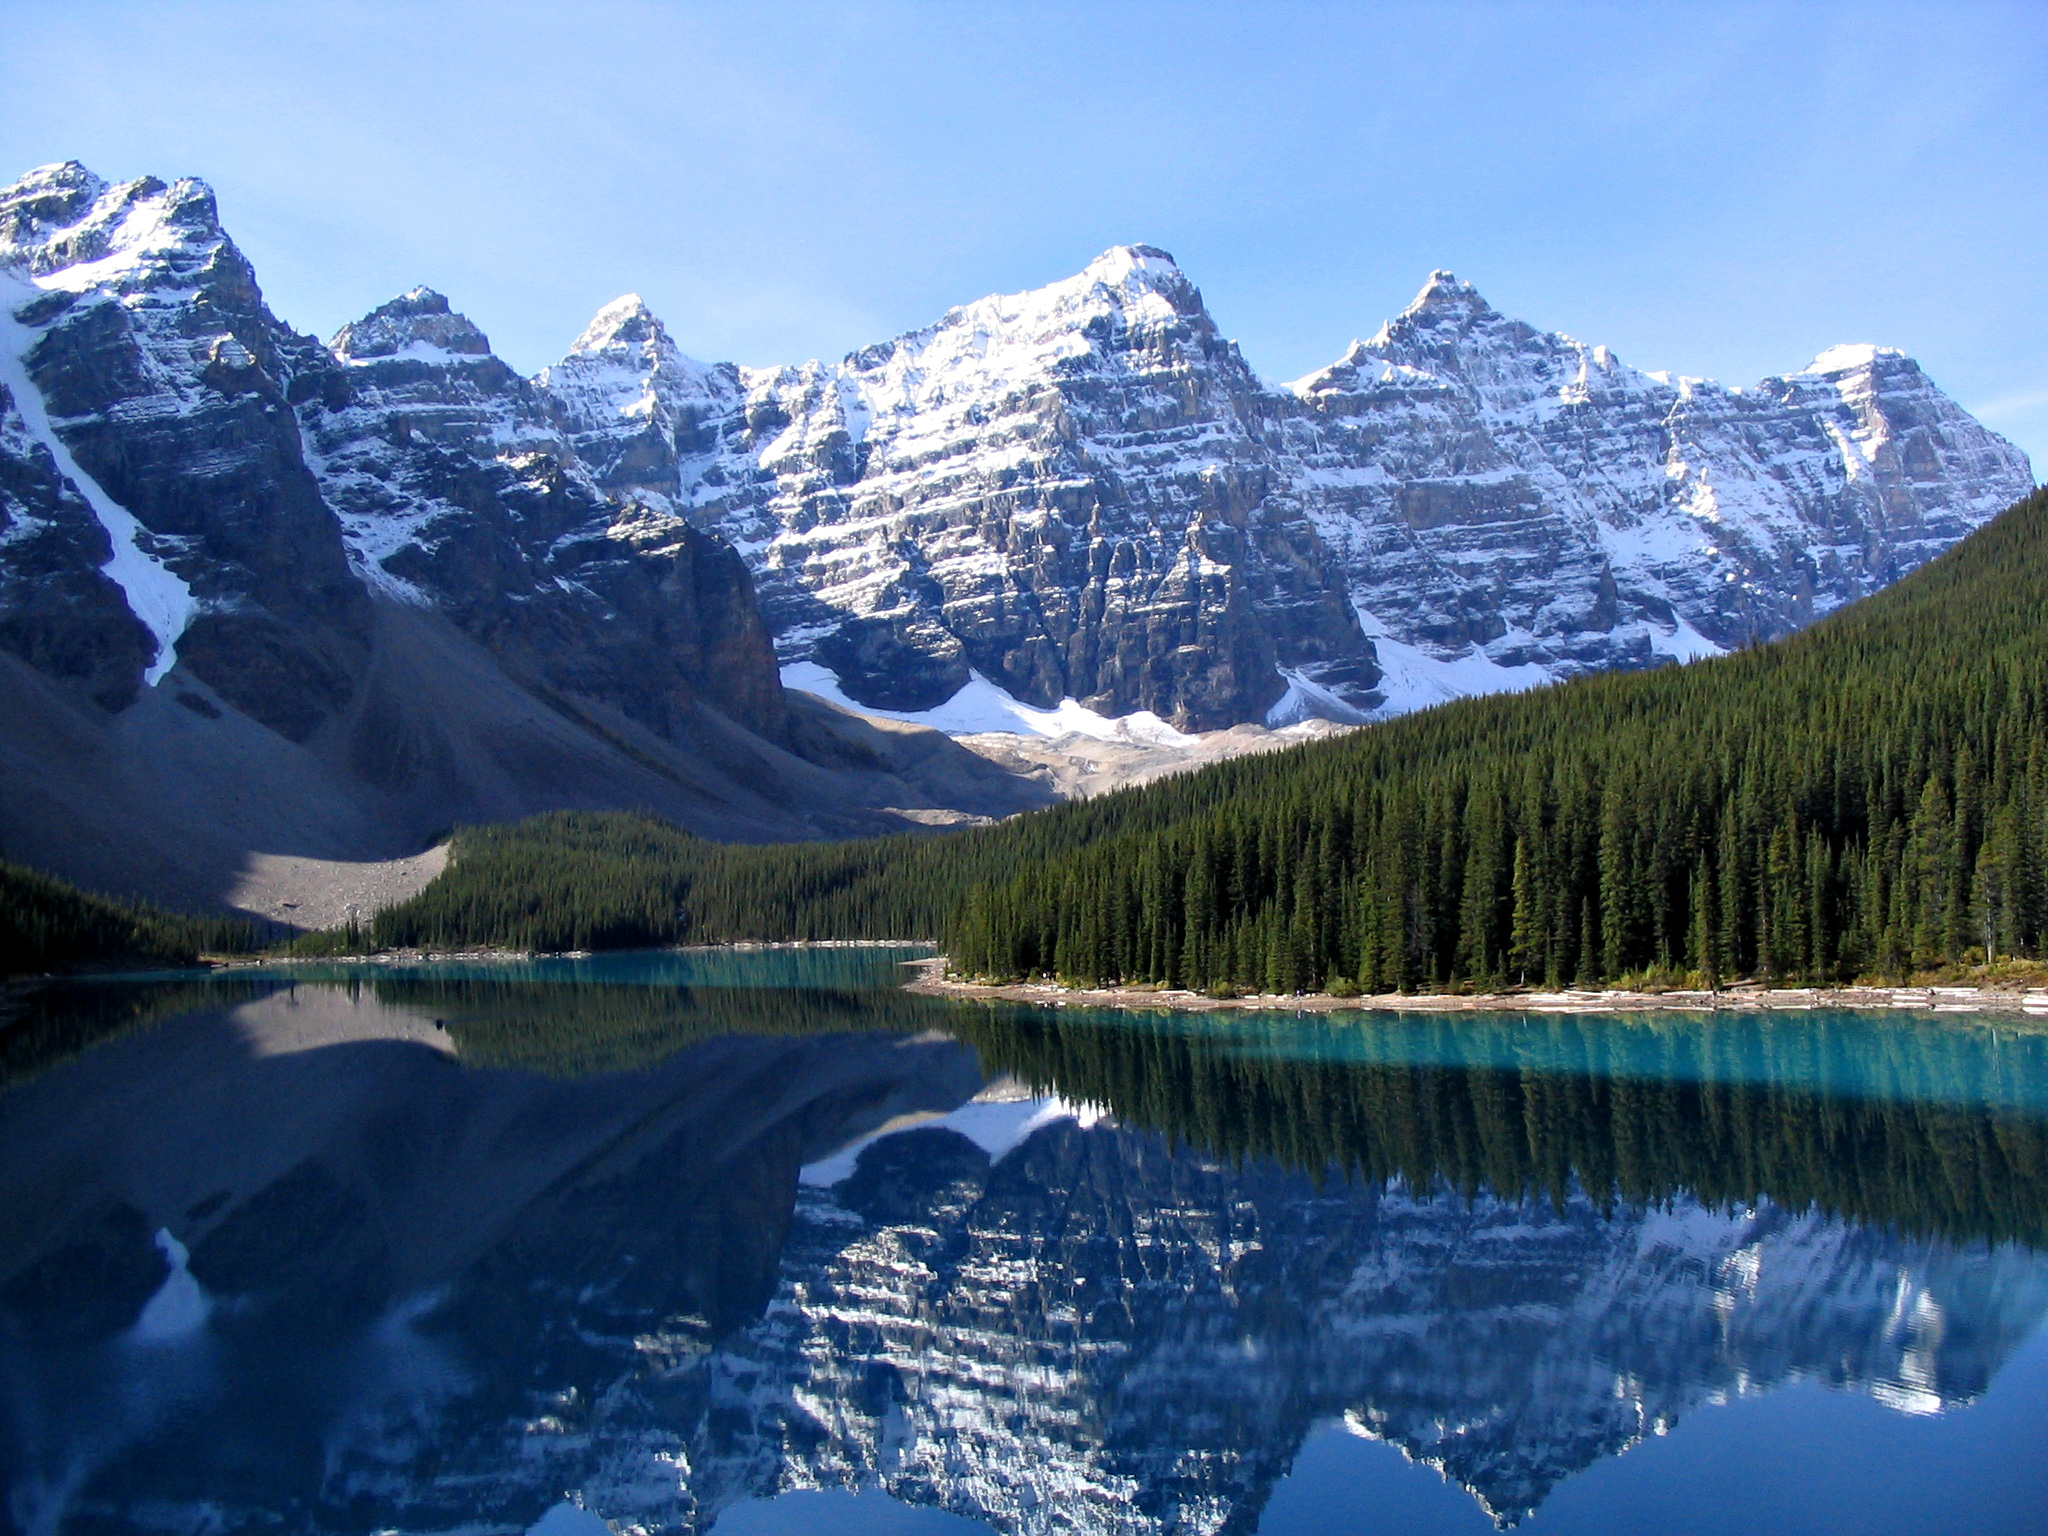 Moraine Lake, and the Valley of the Ten Peaks, Banff National Park, Alberta, Canada